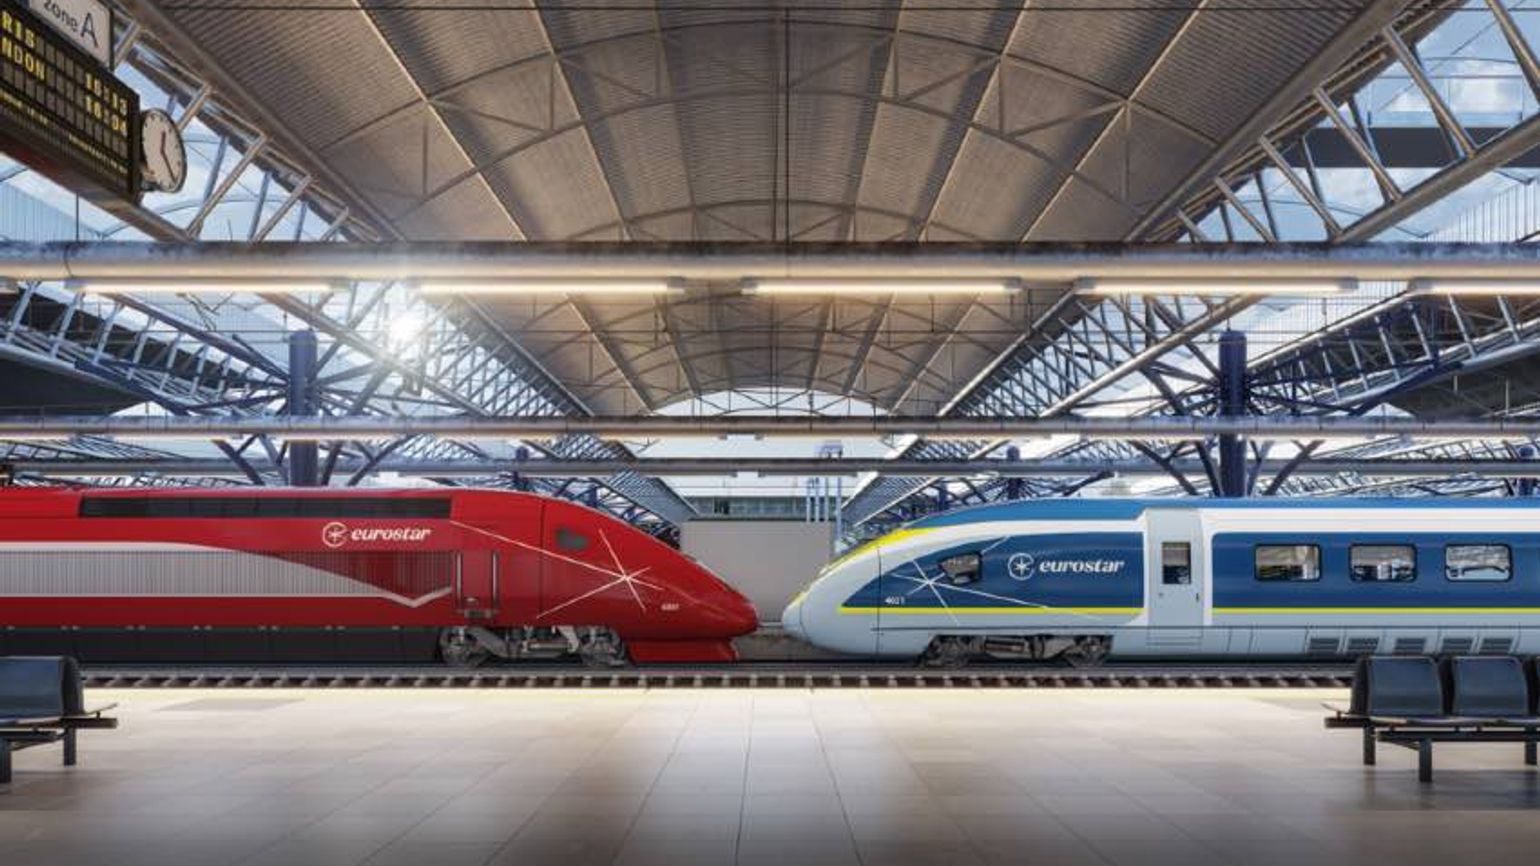 Eurostar Group aims to double traffic as new brand launches